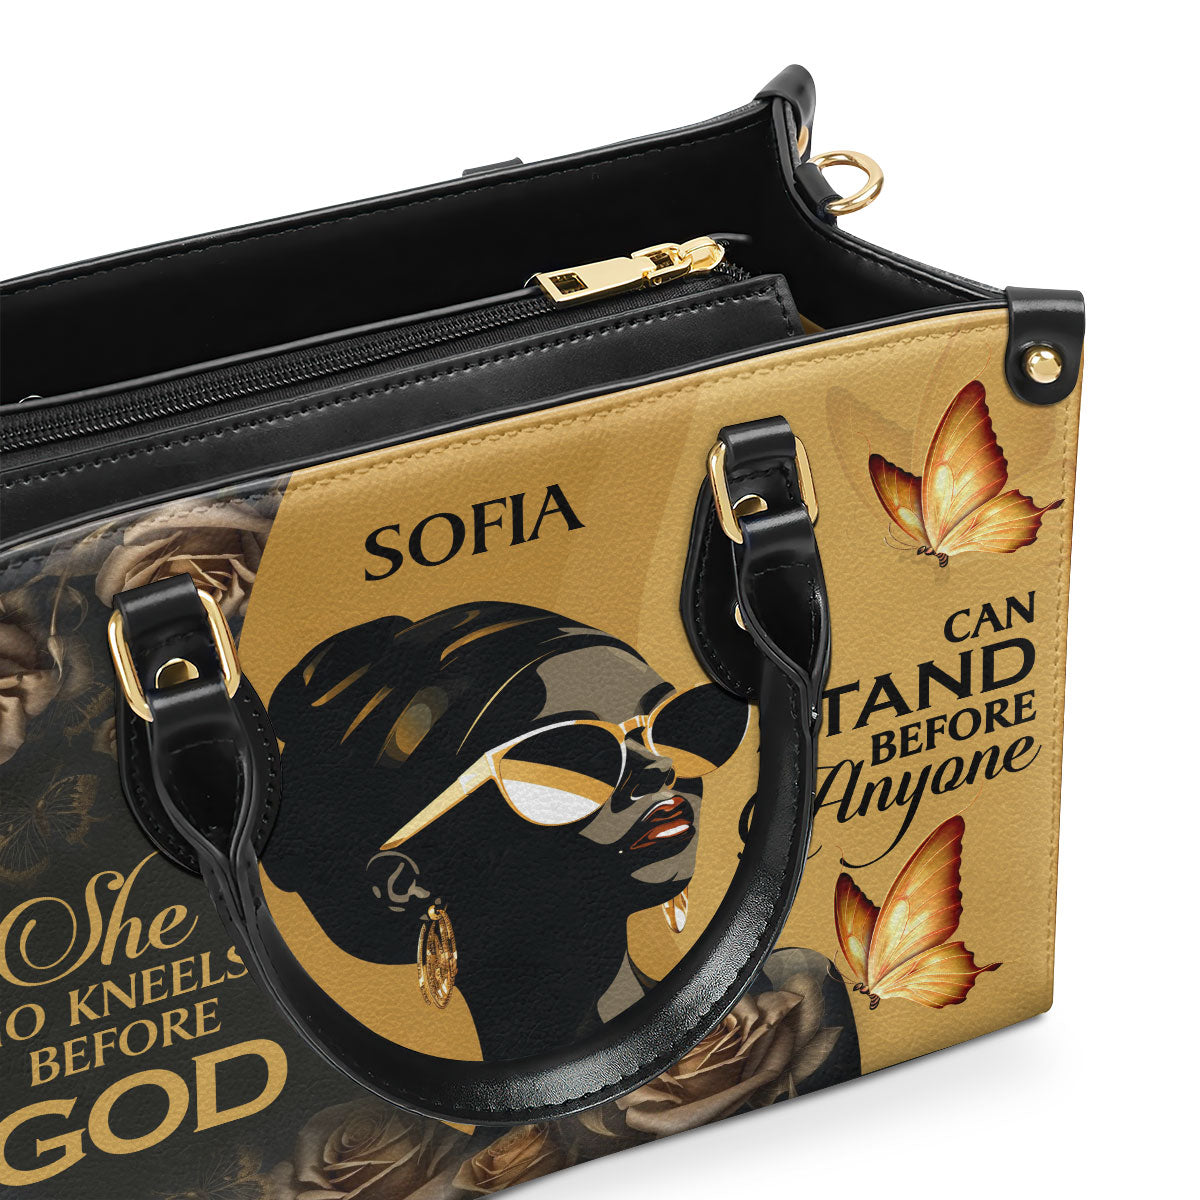 She Who Kneels Before God Can Stand Before Anyone - Personalized Leather Handbag STB10